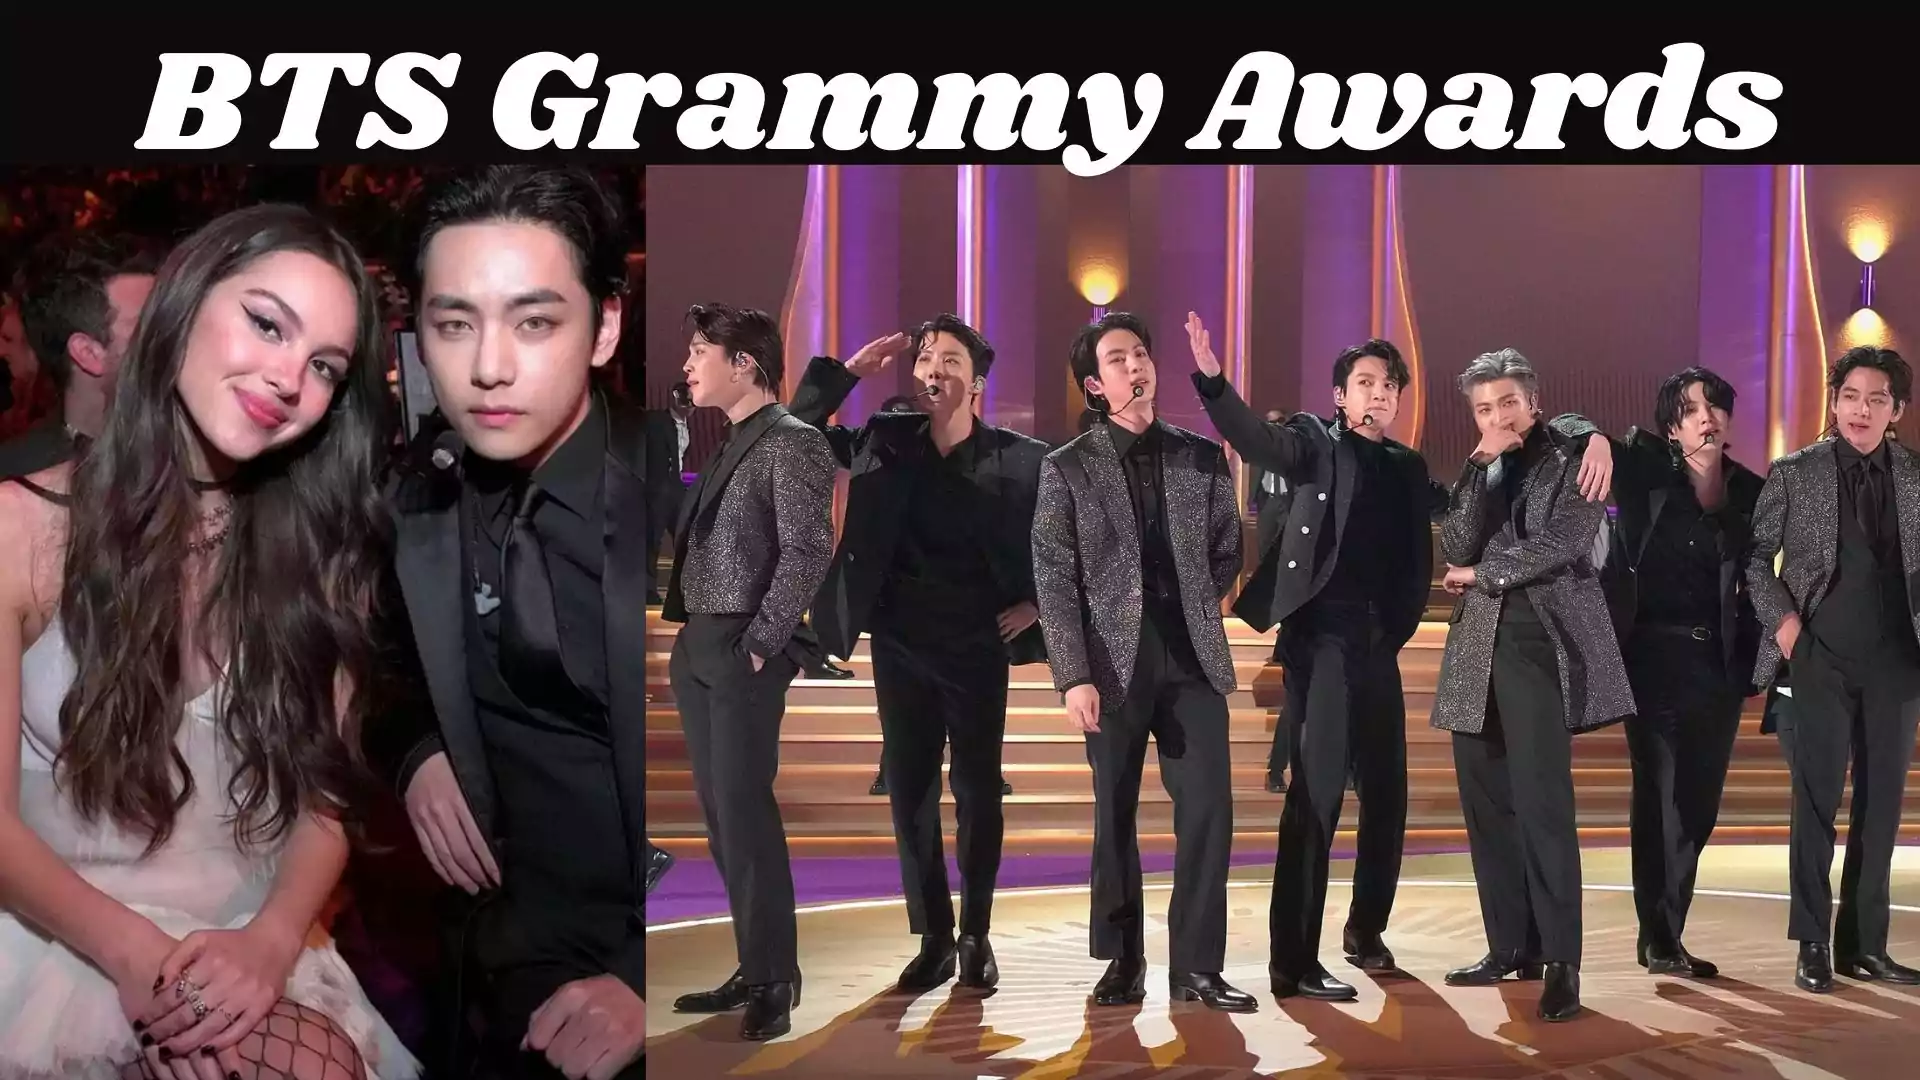 BTS Grammy Awards Wallpaper and images